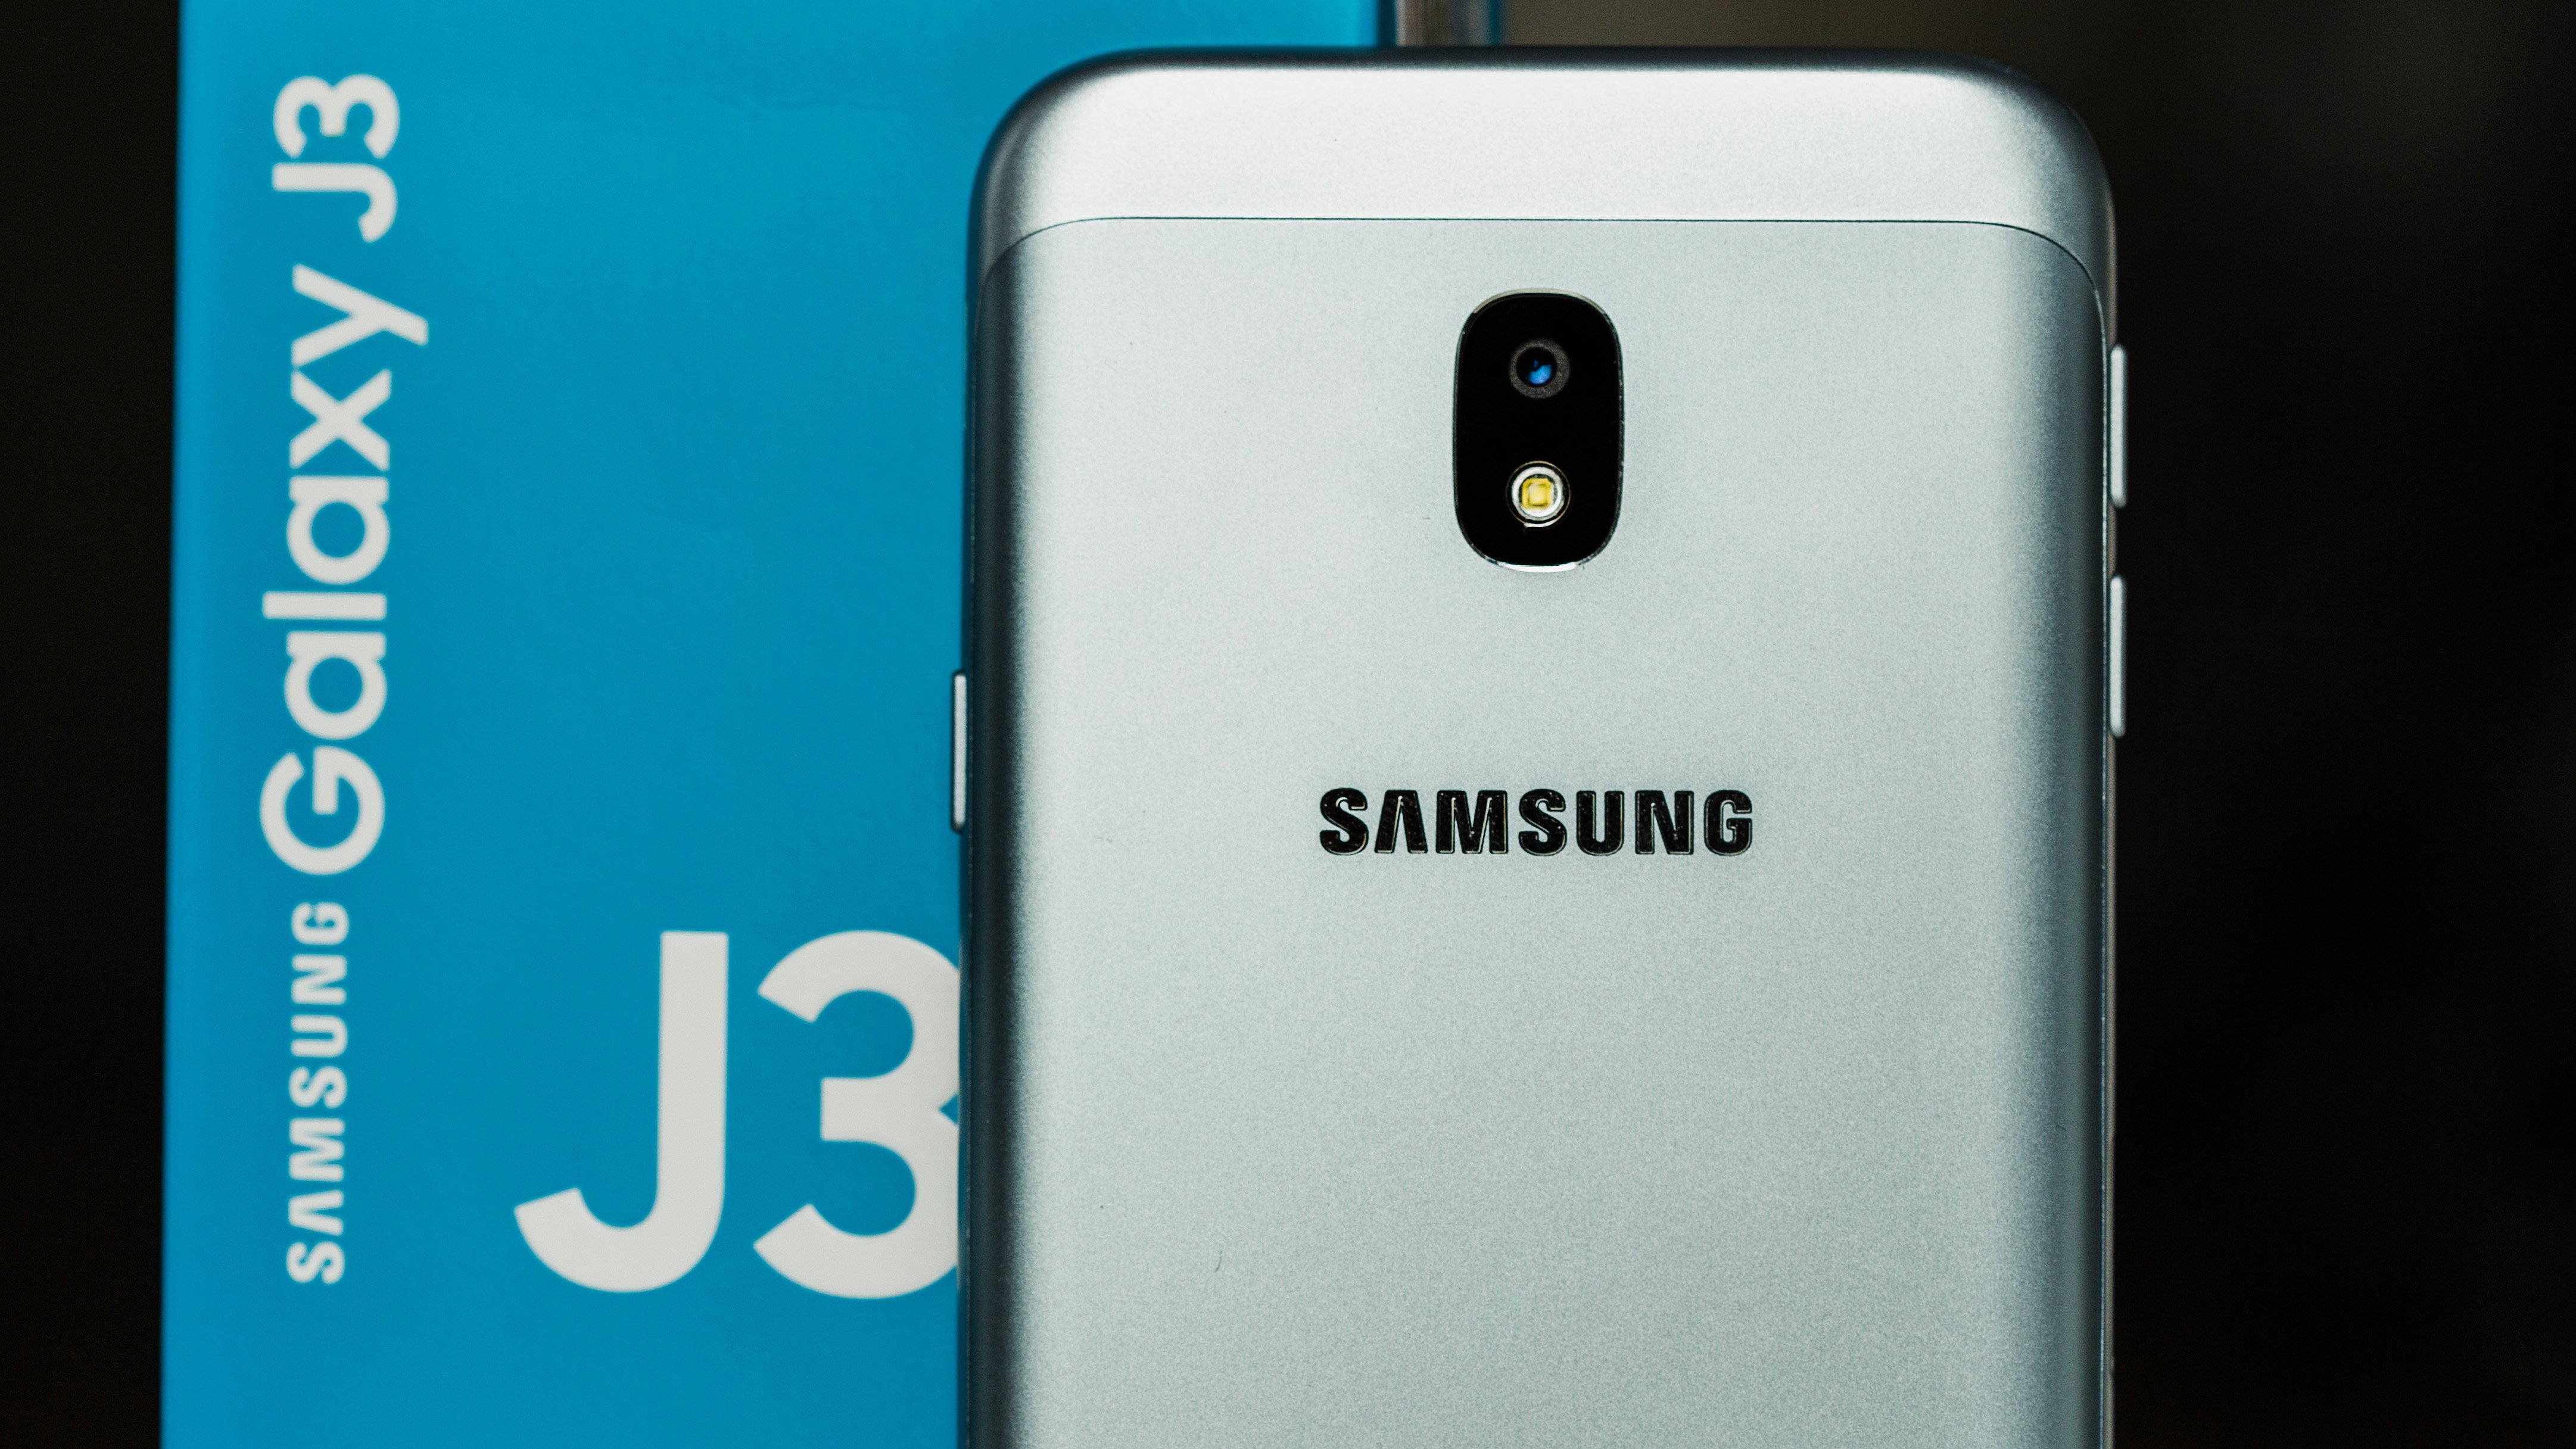 Samsung Galaxy J3 (2017) review: Worthy of more attention | AndroidPIT